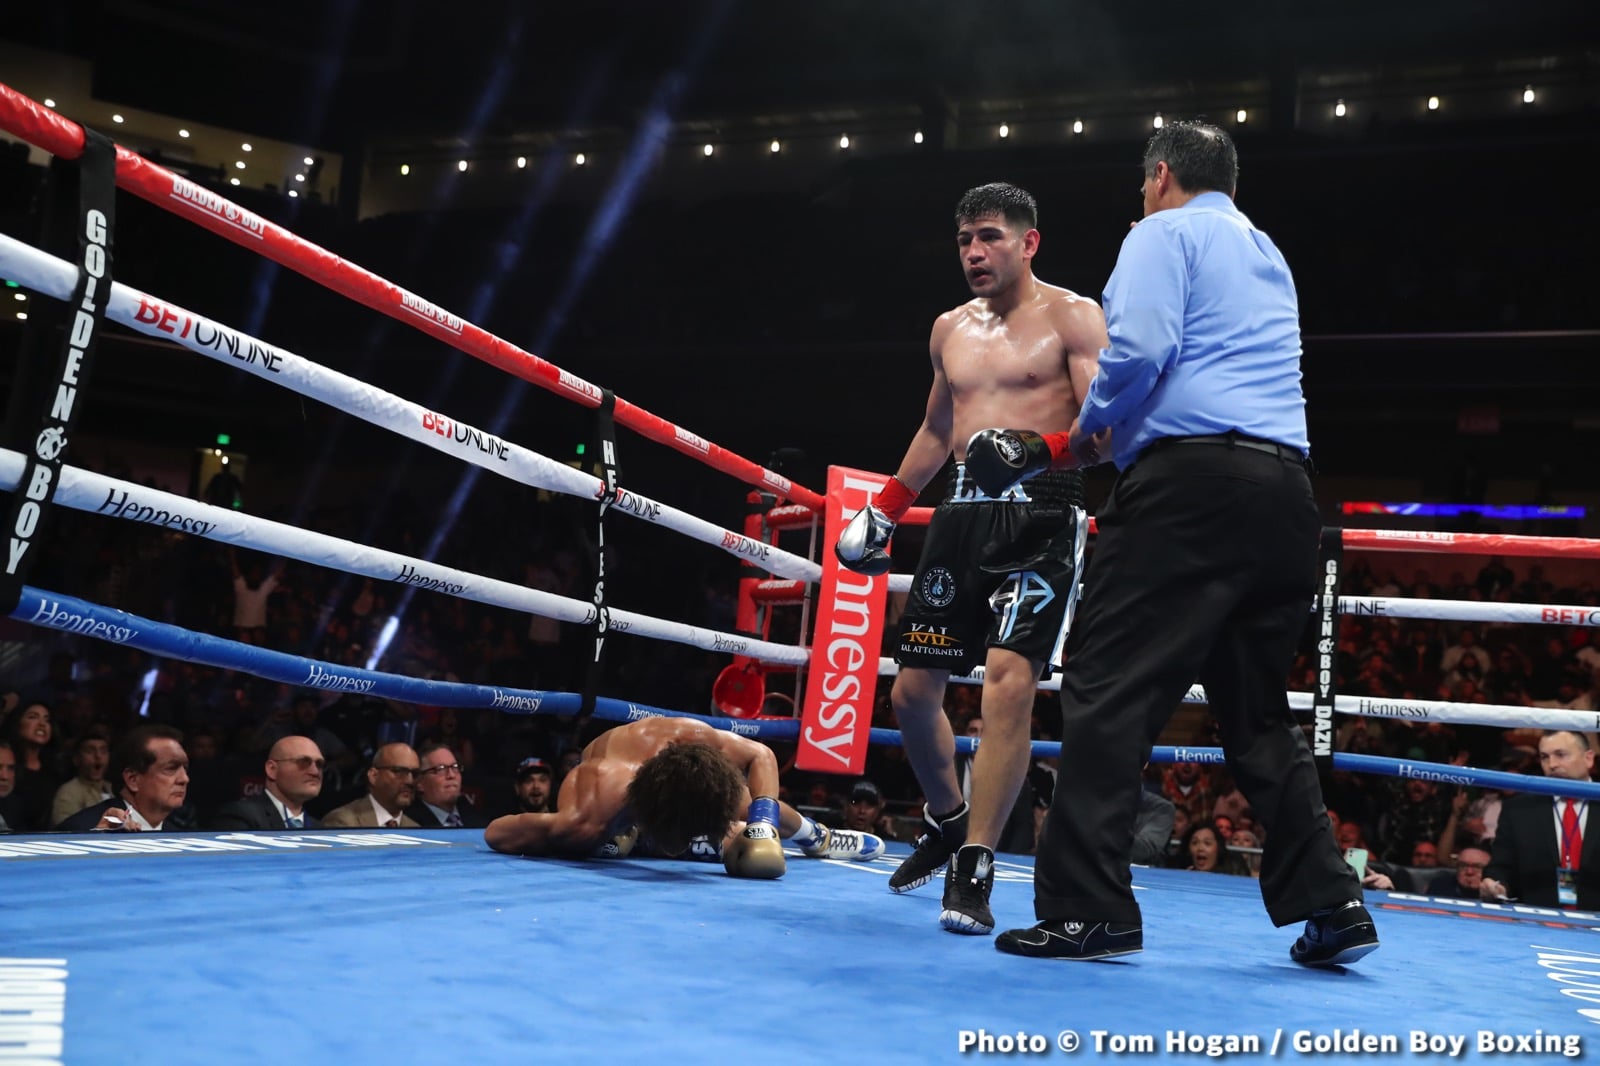 Image: Boxing Results: Alexis “Lex” Rocha Stops Blair “The Flair” Cobb in L.A.!